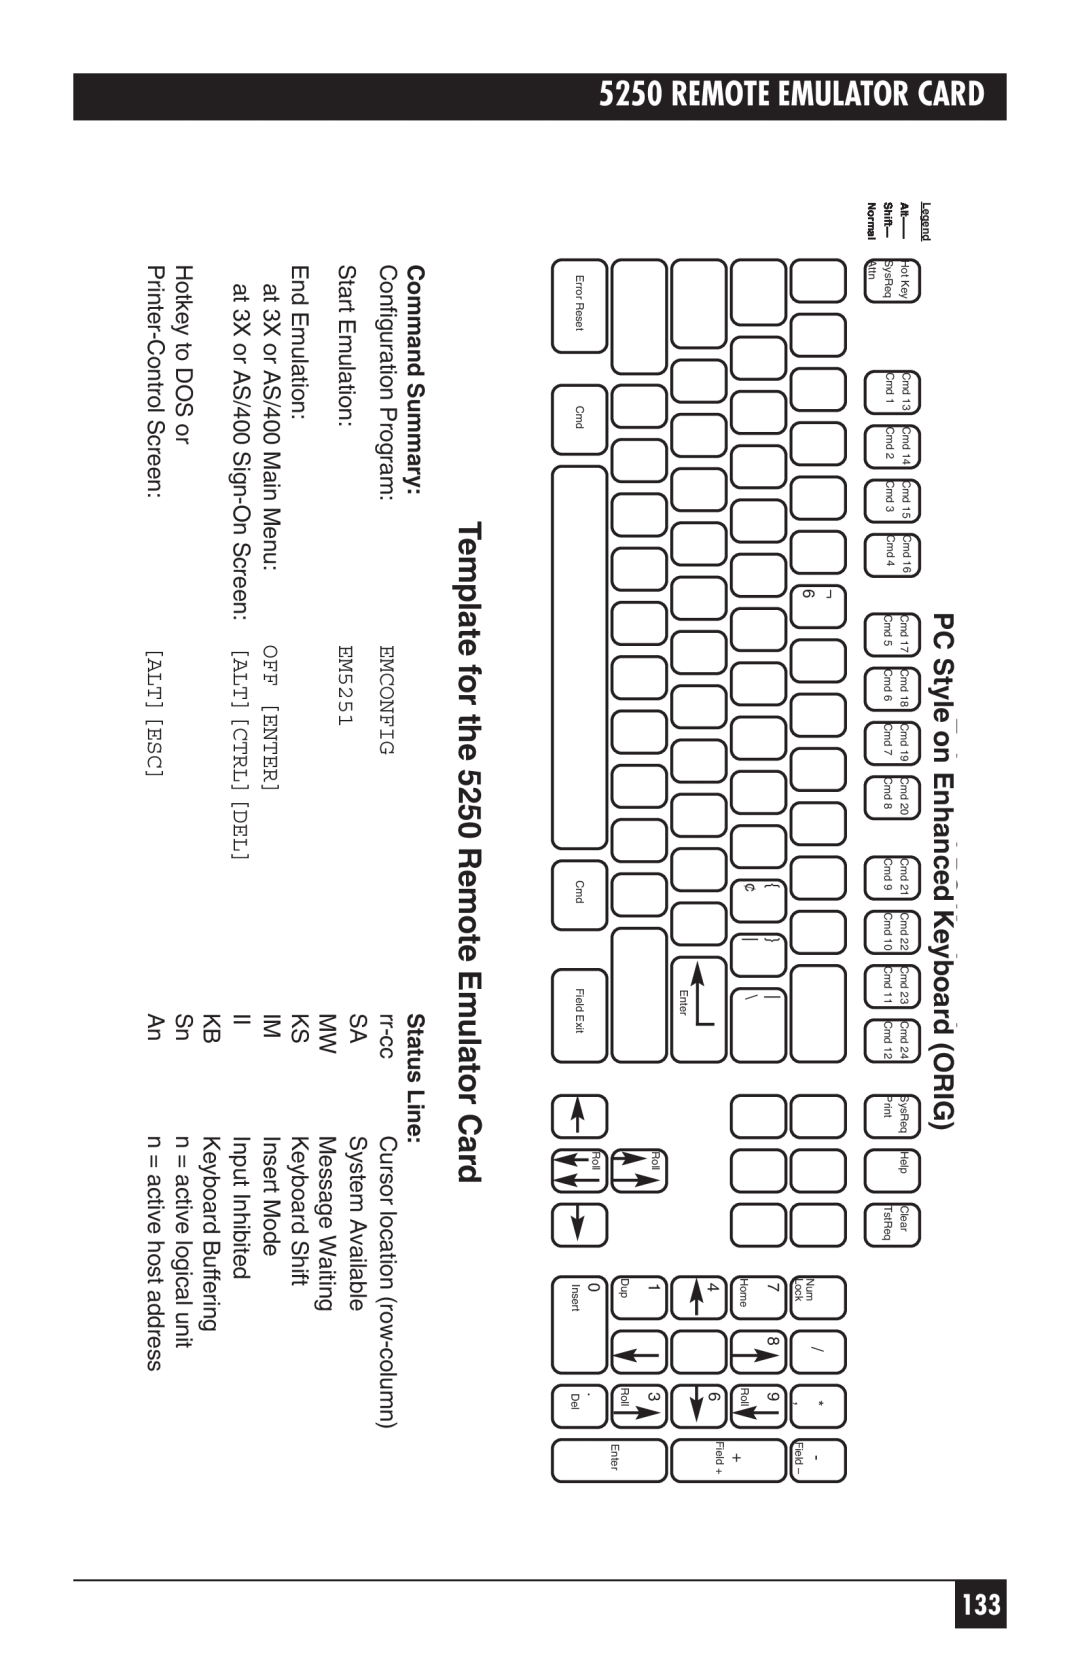 Black Box Template for the 5250 Remote Emulator Card, Enhanced PC, PC Style on EnhancedKeyboard ORIG, Command Summary 